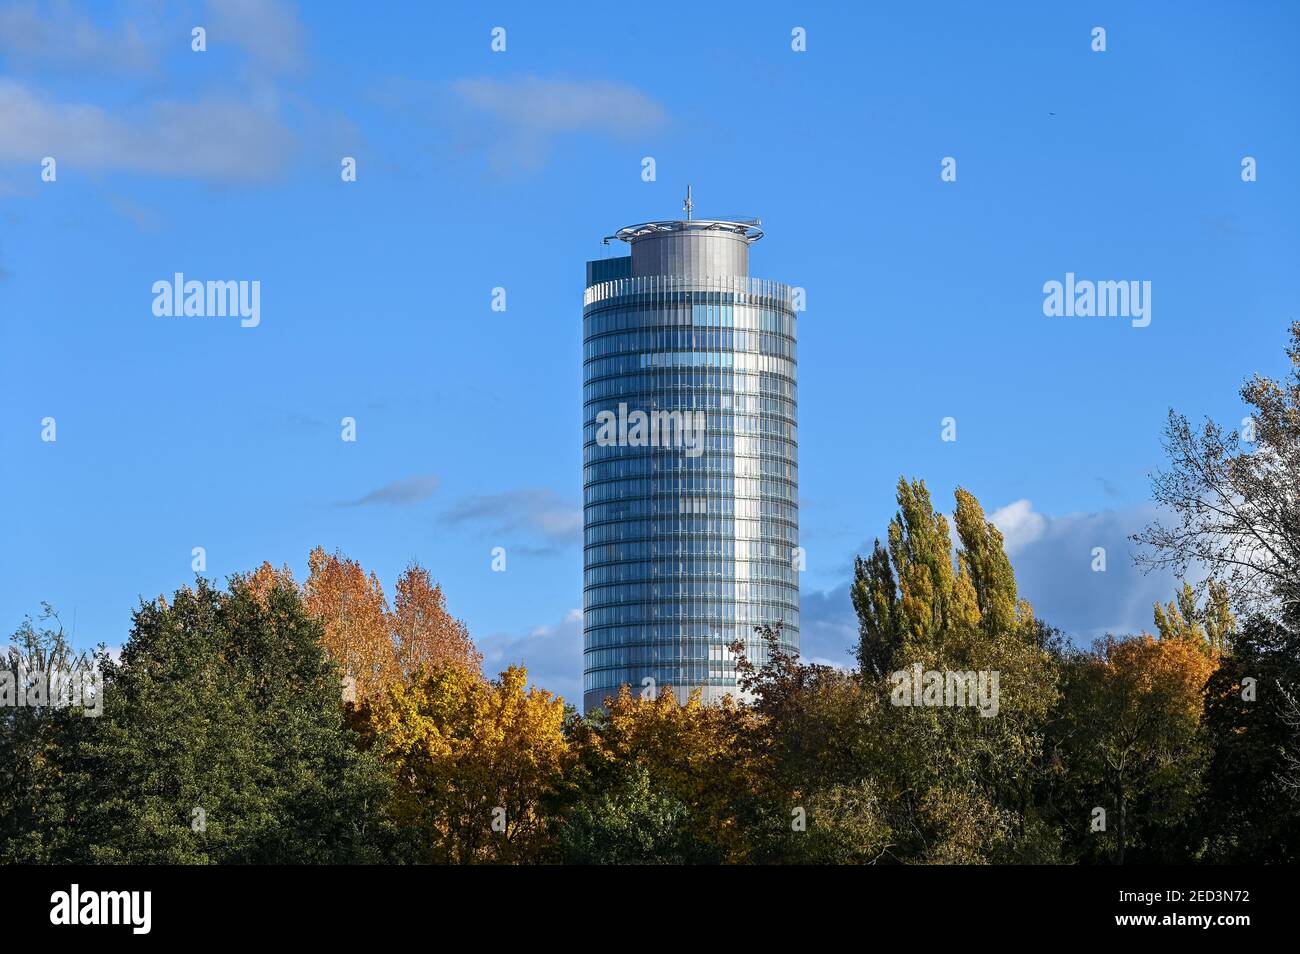 The Business tower in Nuremberg with colourful autumn trees Stock Photo